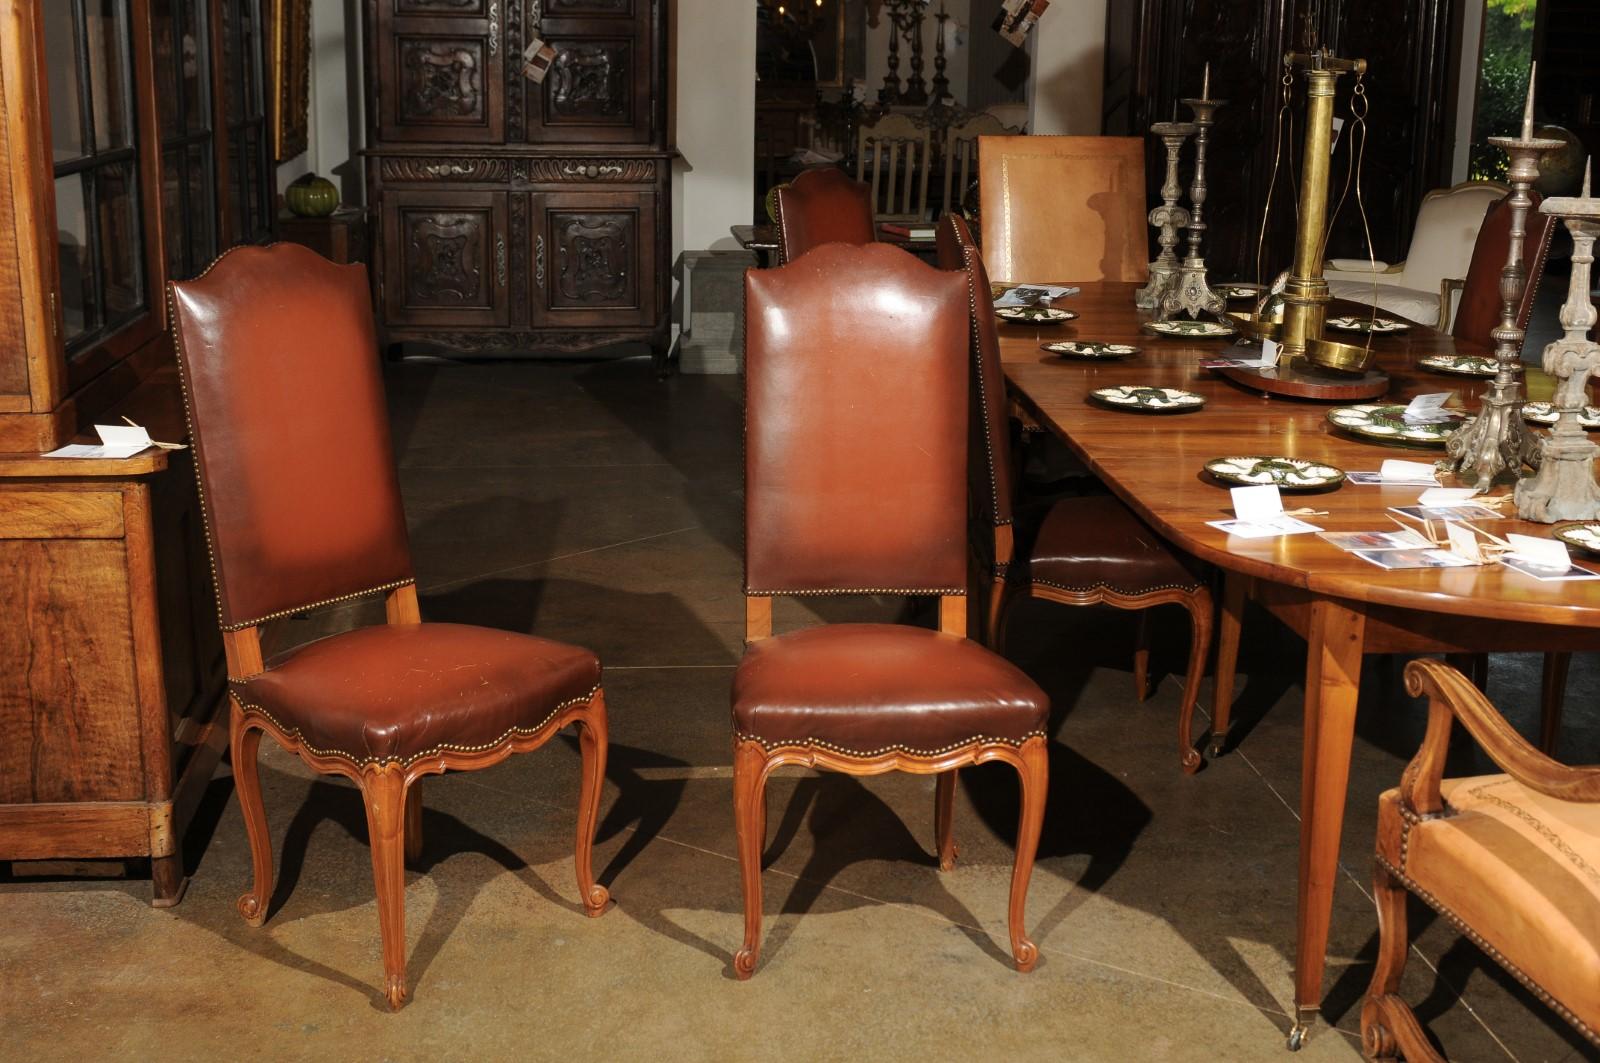 A set of eight French Louis XV style walnut dining room chairs from the 19th century, with leather upholstered seats and backs, and cabriole legs. Born during the 19th century, this set of French dining room side chairs presents the stylistic traits